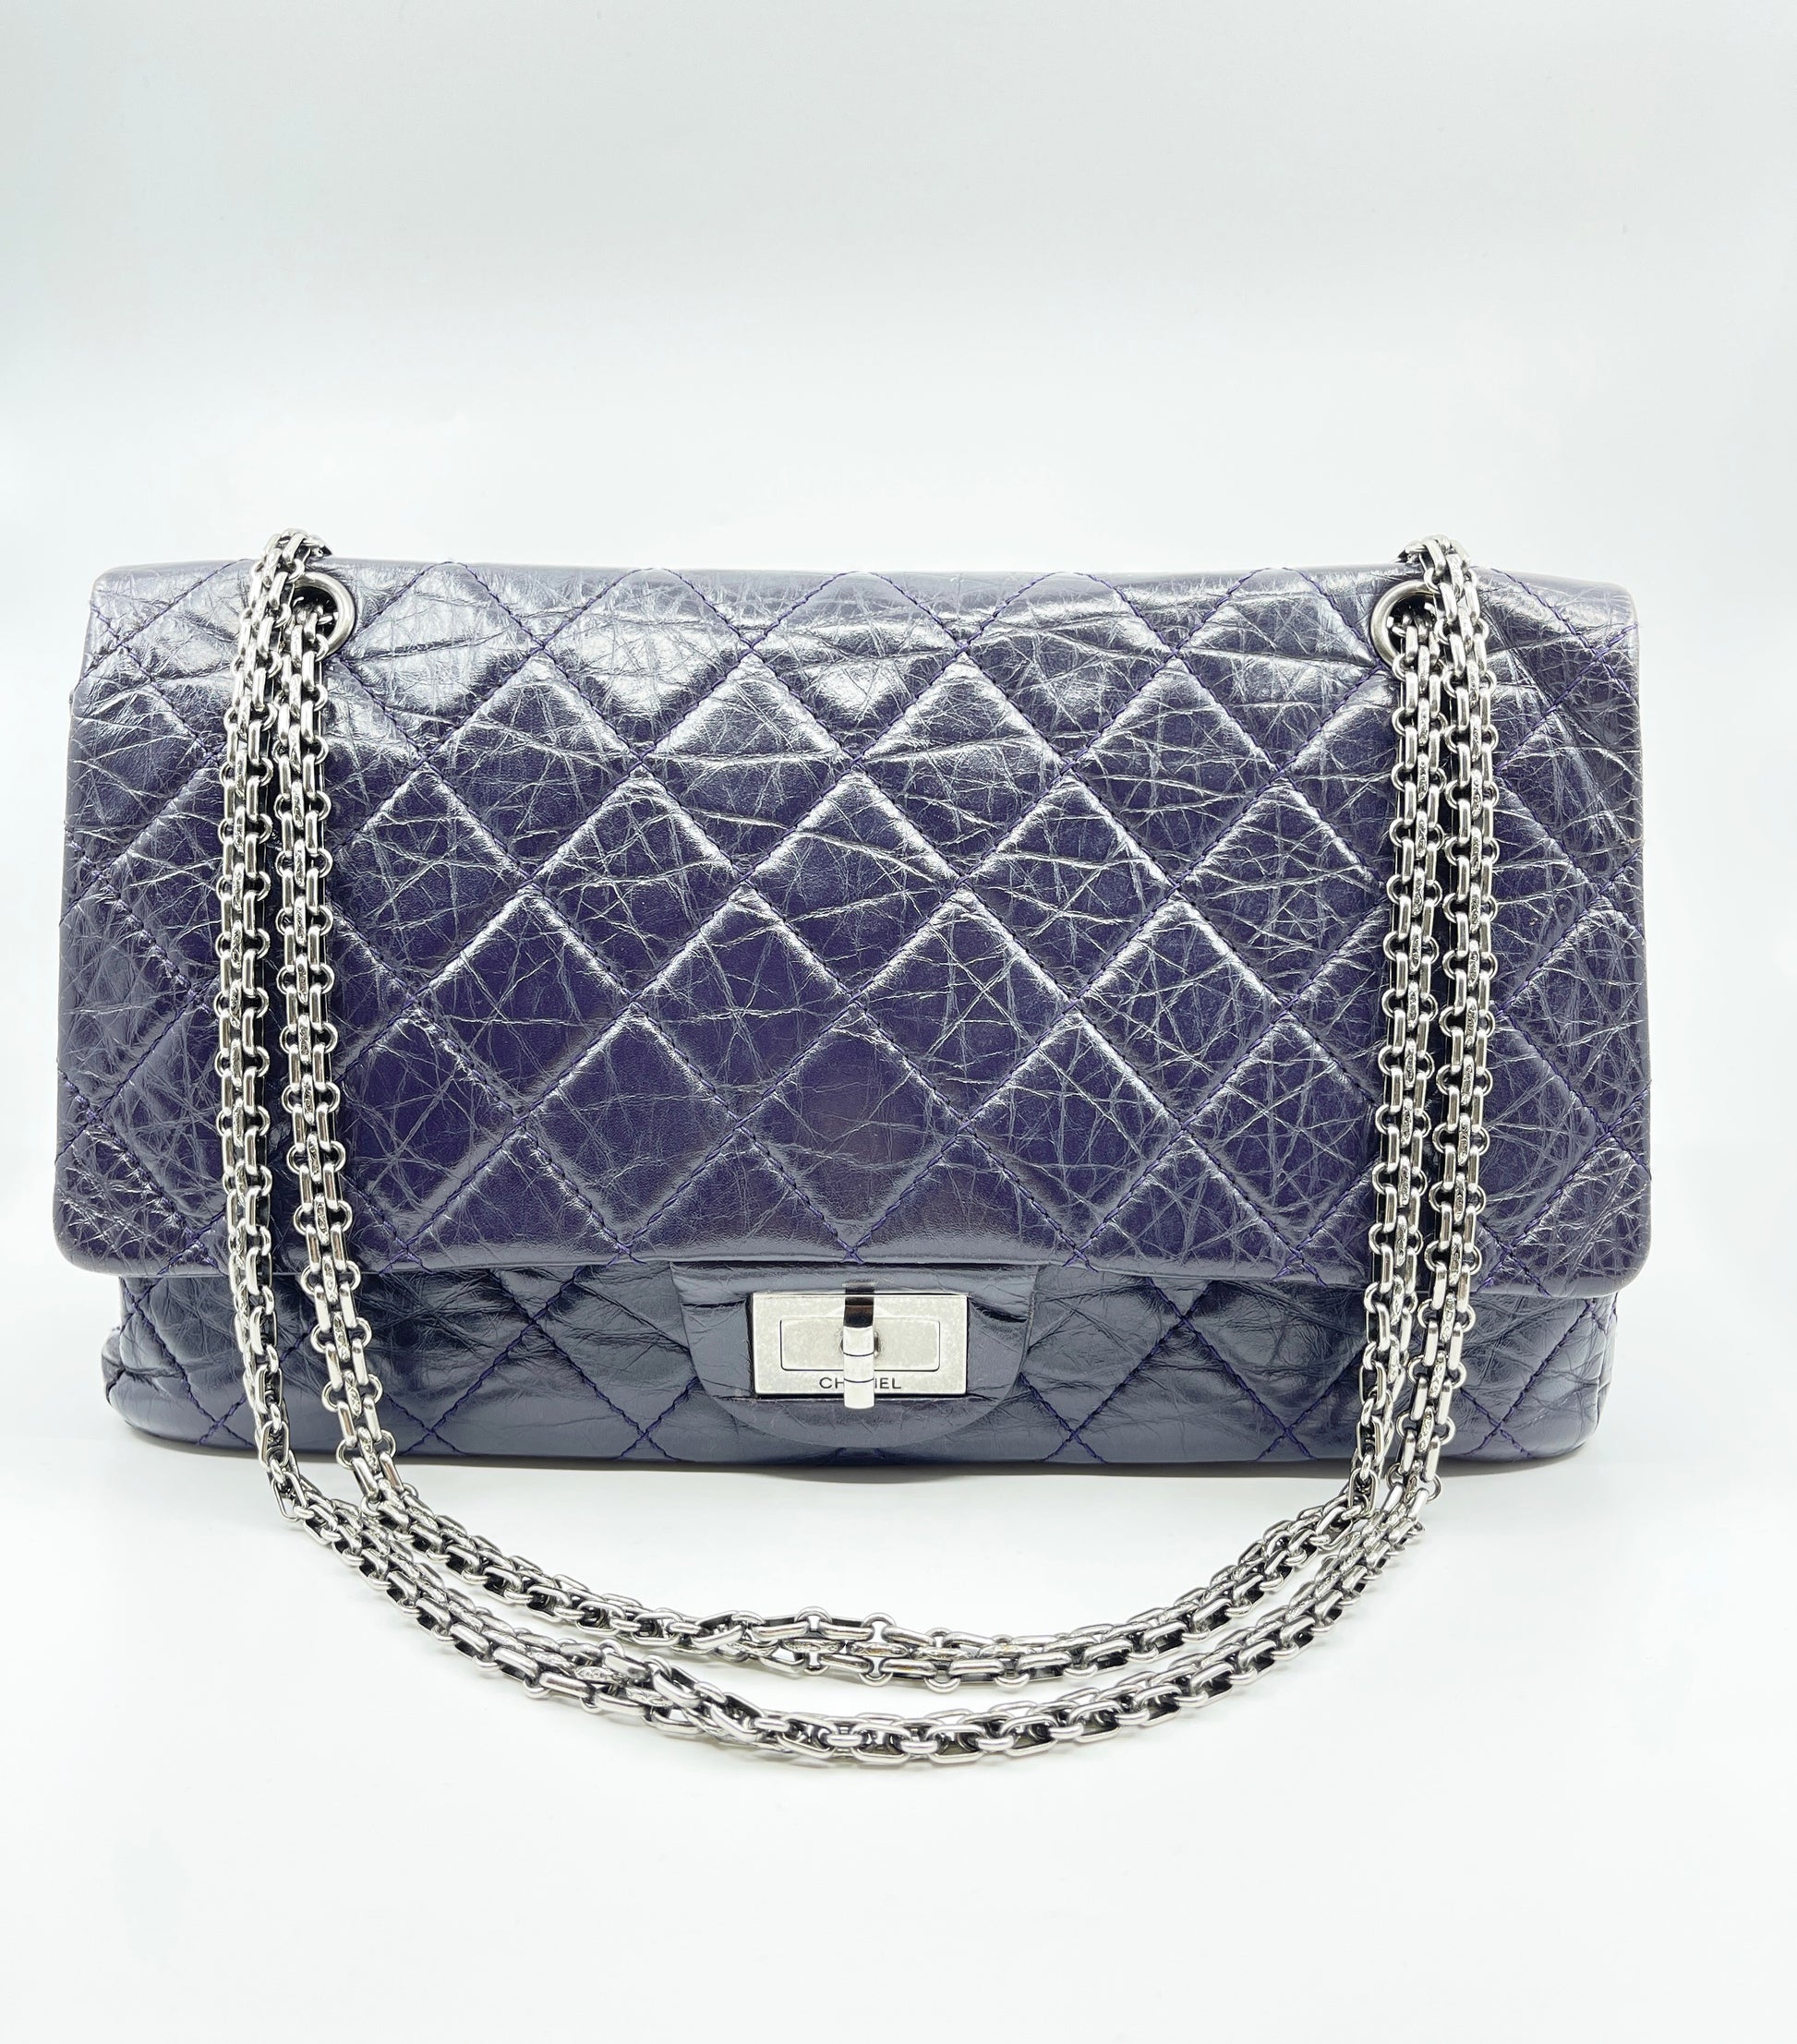 CHANEL 2.55 REISSUE 228 DOUBLE FLAP BAG – RE-LUXRY